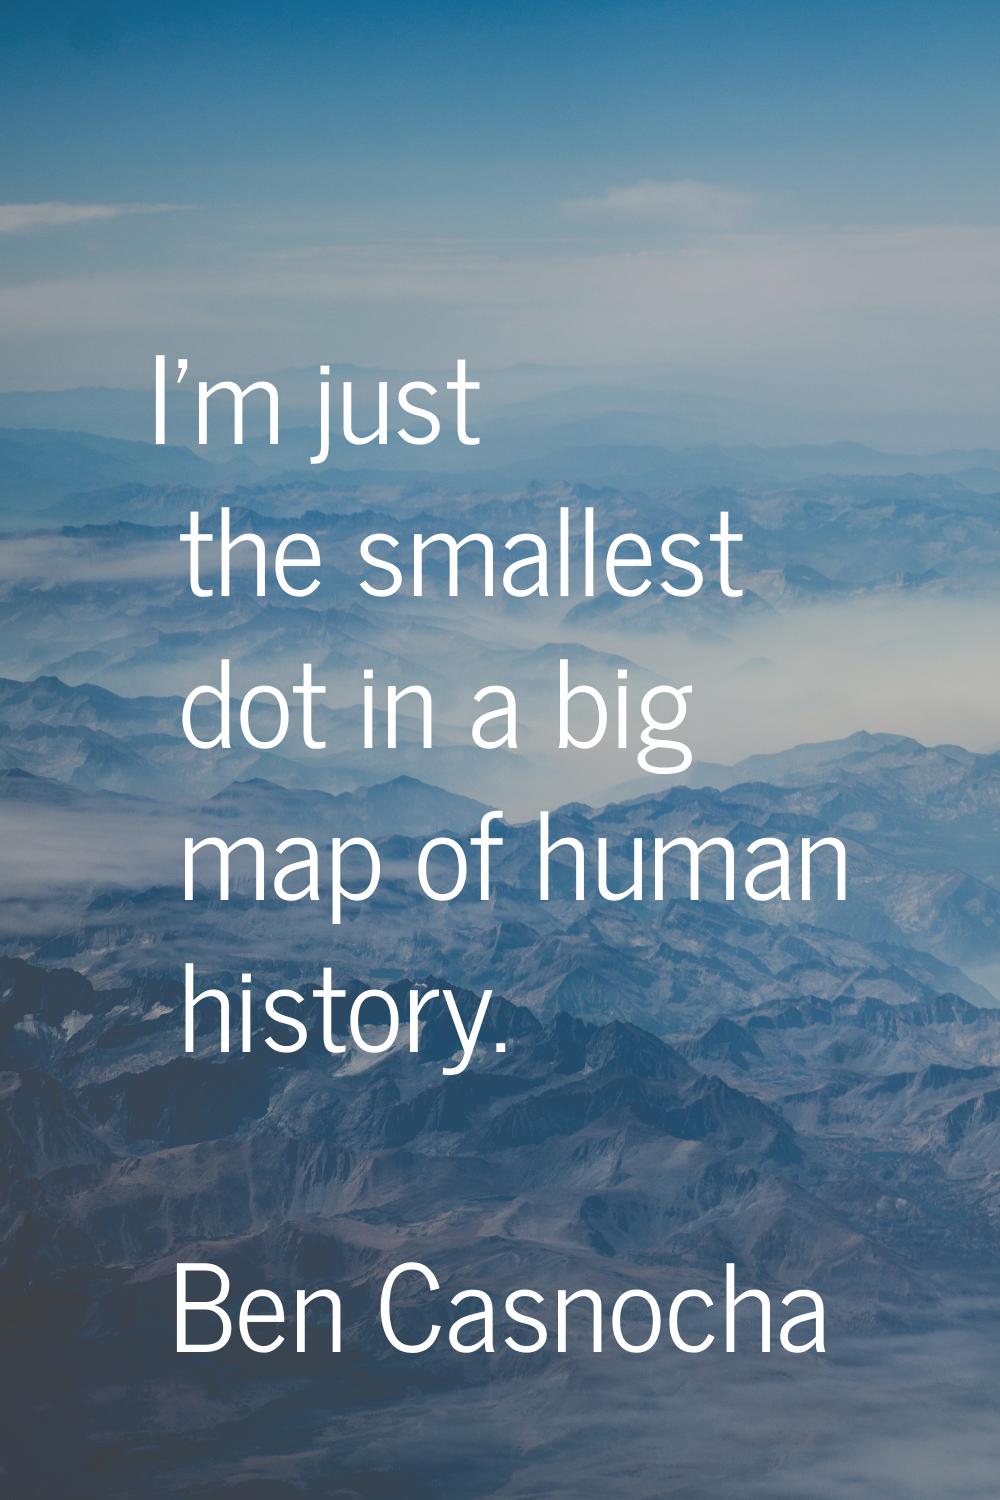 I'm just the smallest dot in a big map of human history.